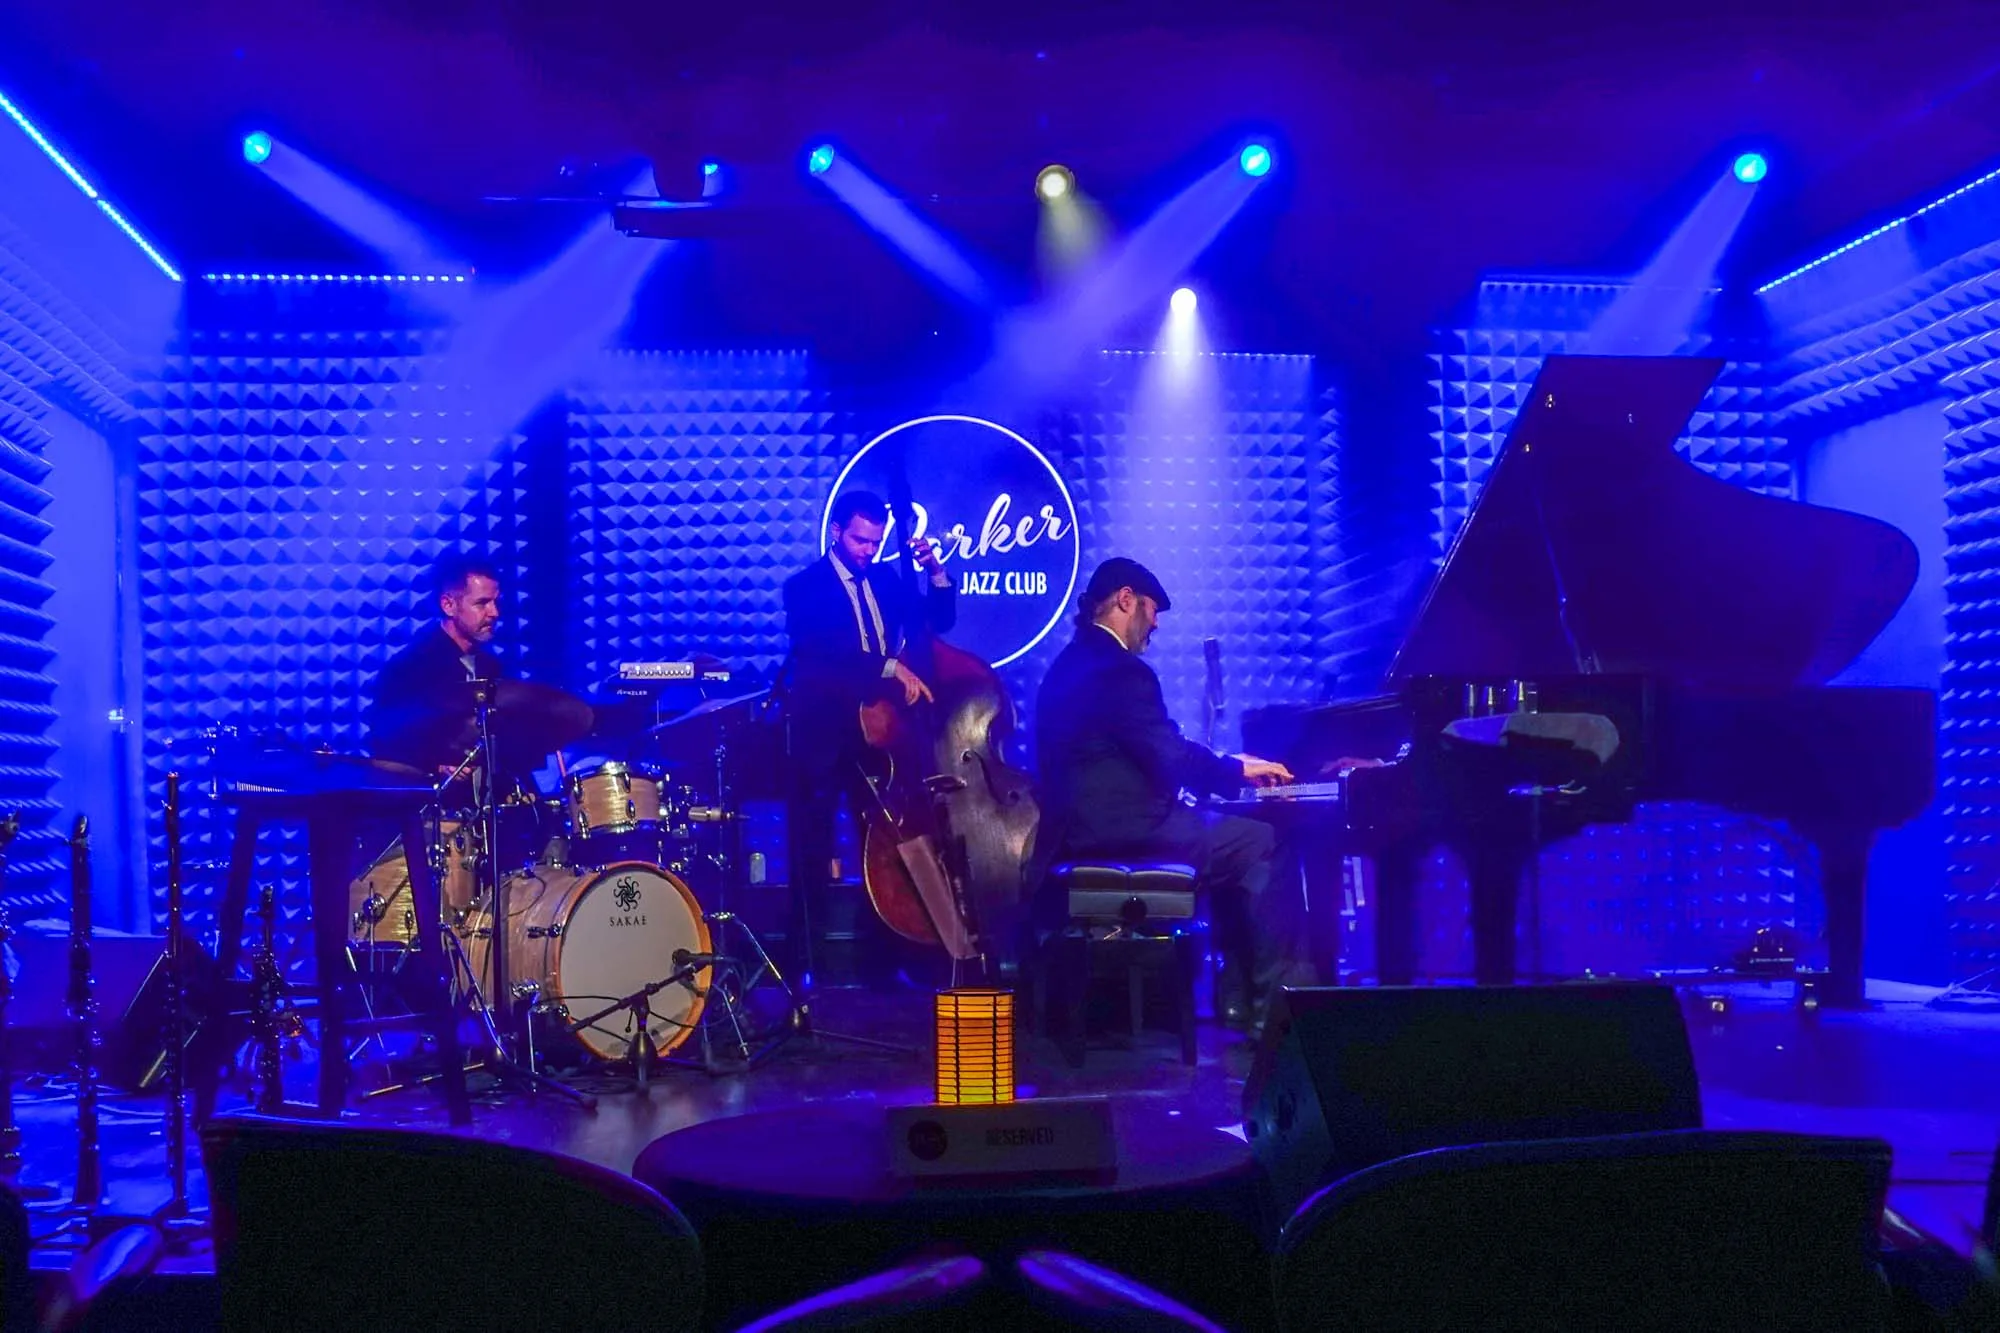 Jazz trio performing on stage with blue lighting